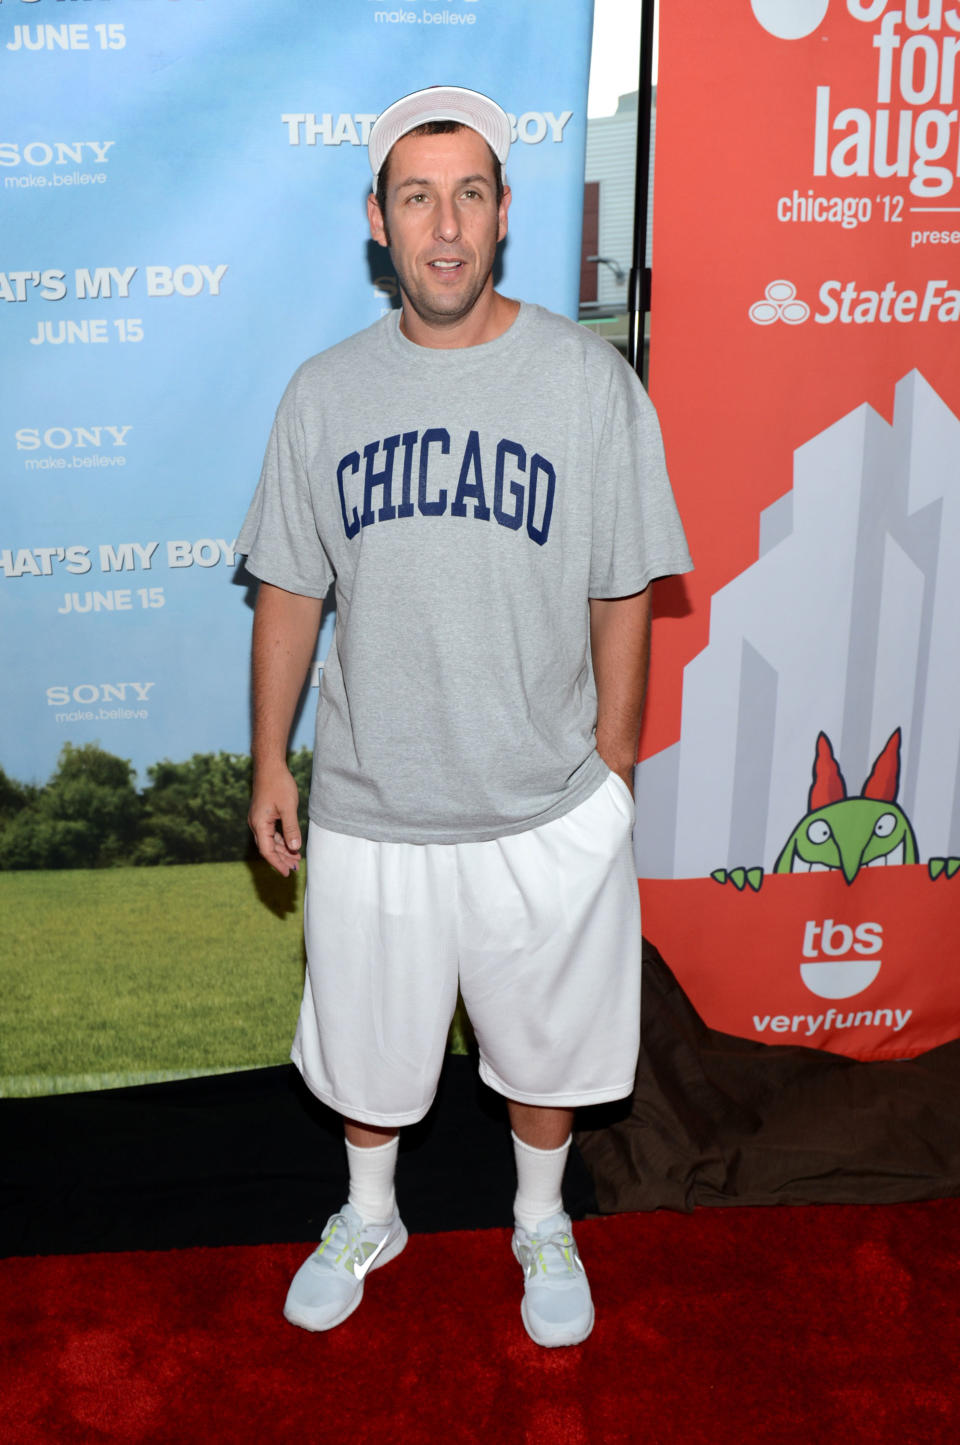 The shorts and long and baggy, the T-shirt is a Chicago tee, and he's wearing a cap